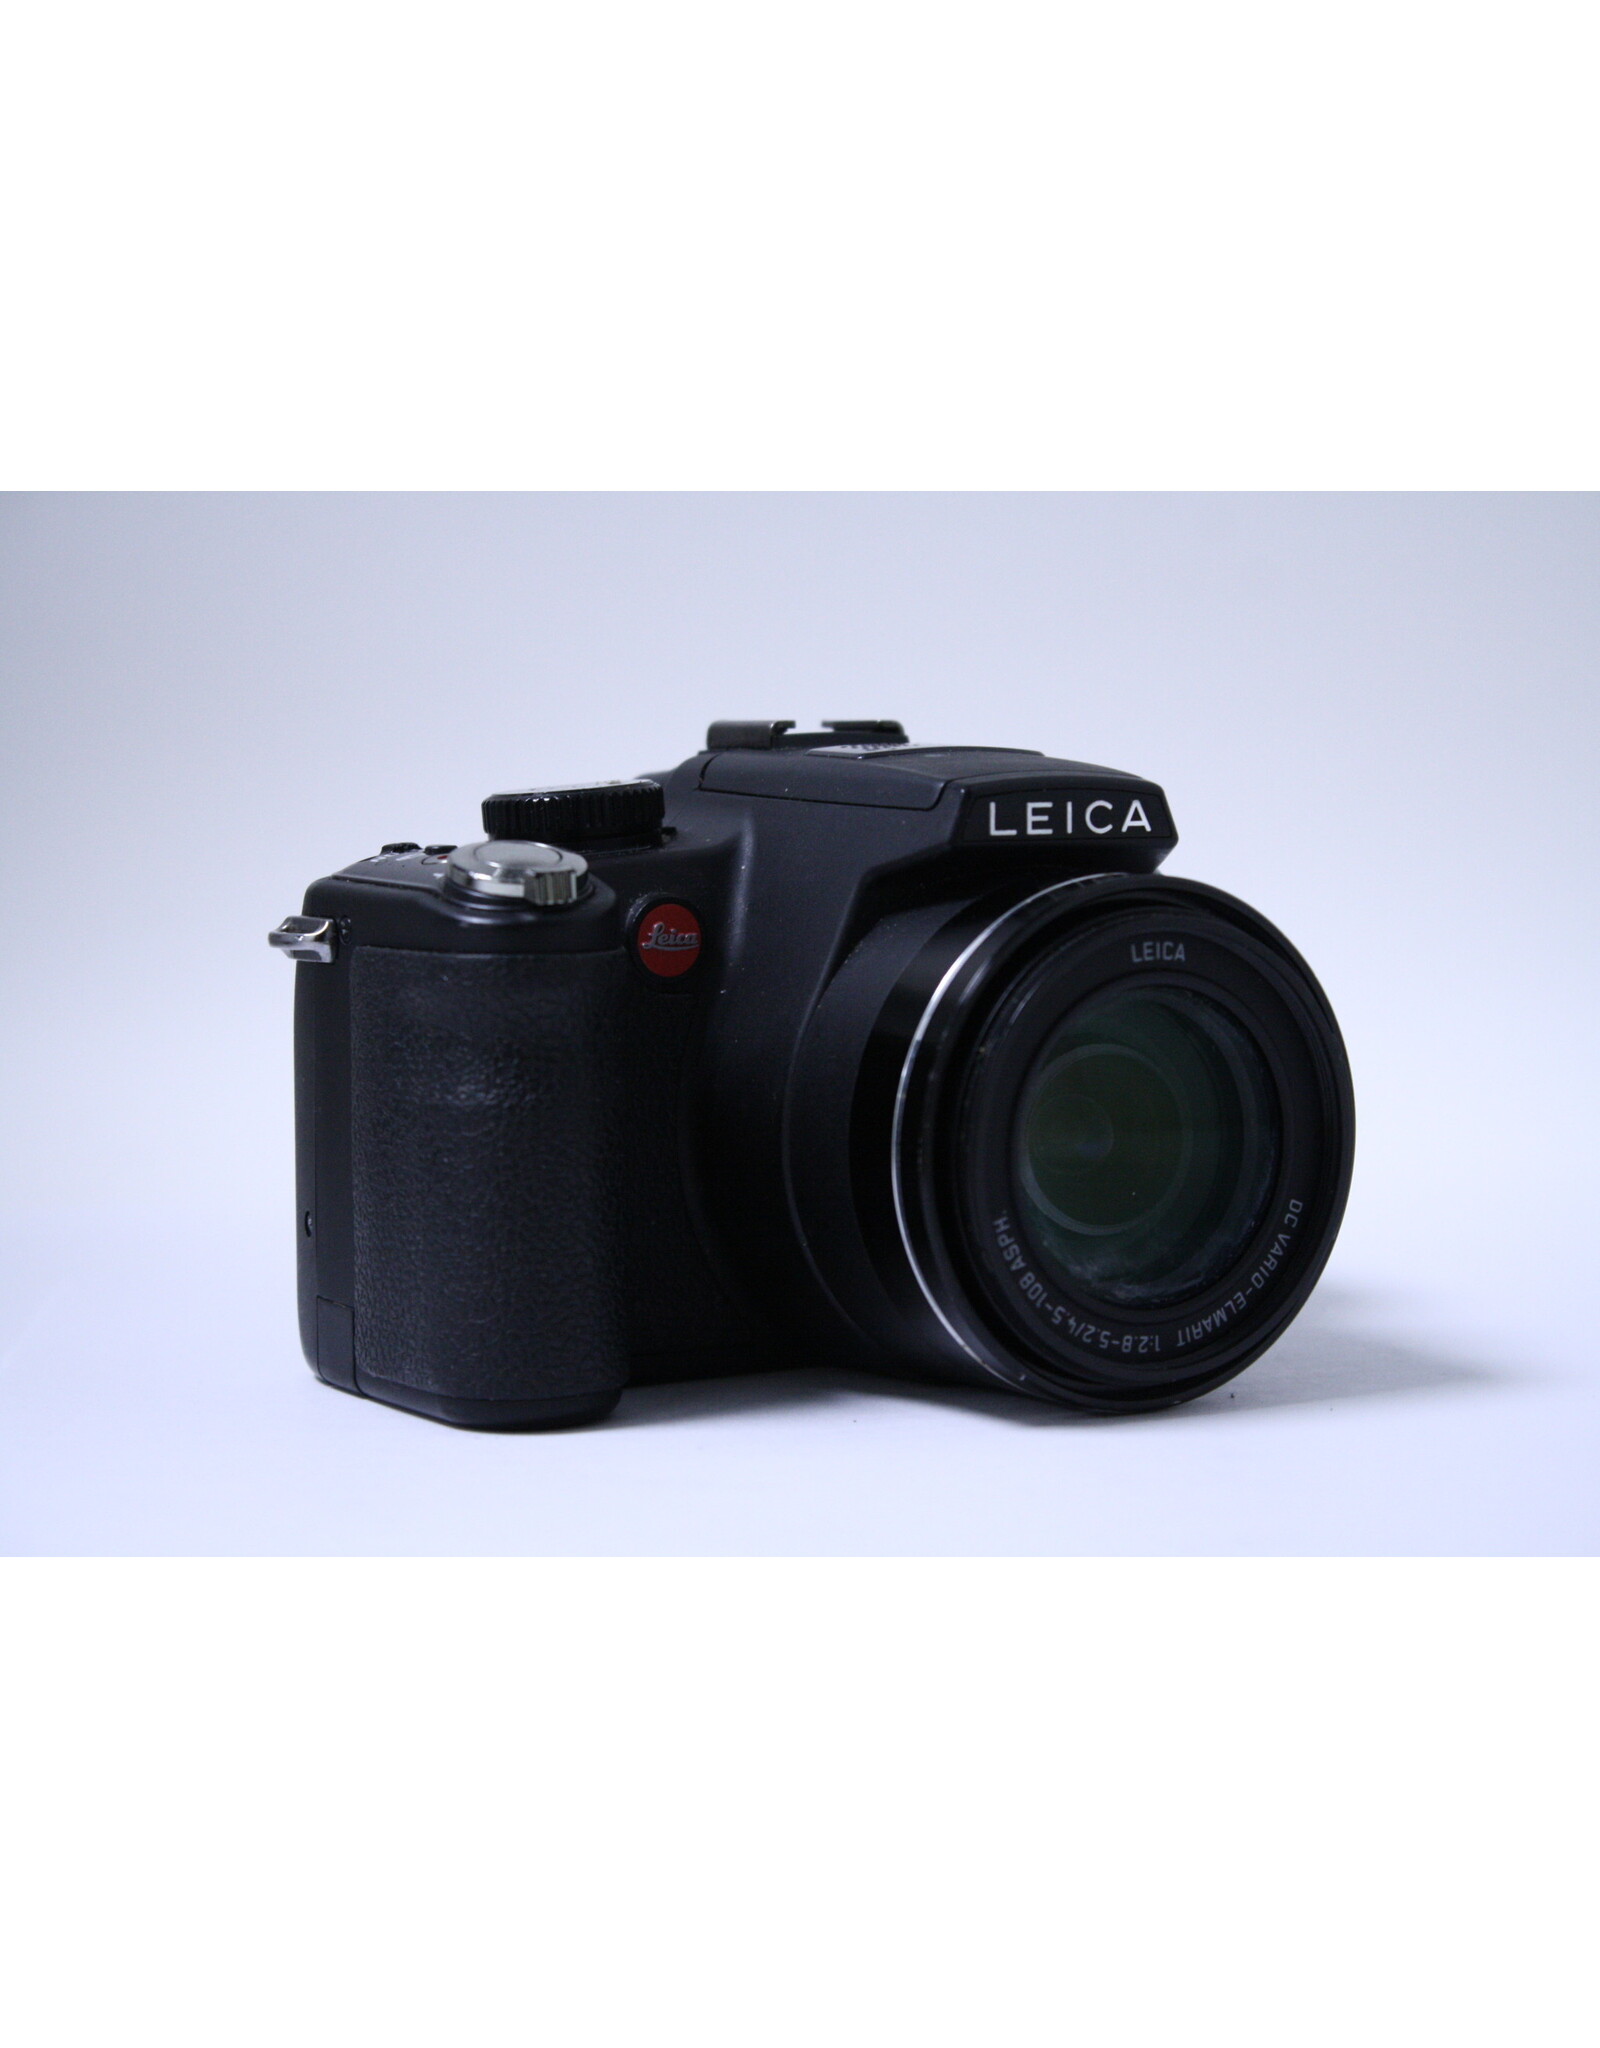 Leica V-LUX 2 14.1 MP Digital Camera Black with a free charger(Pre-owned)